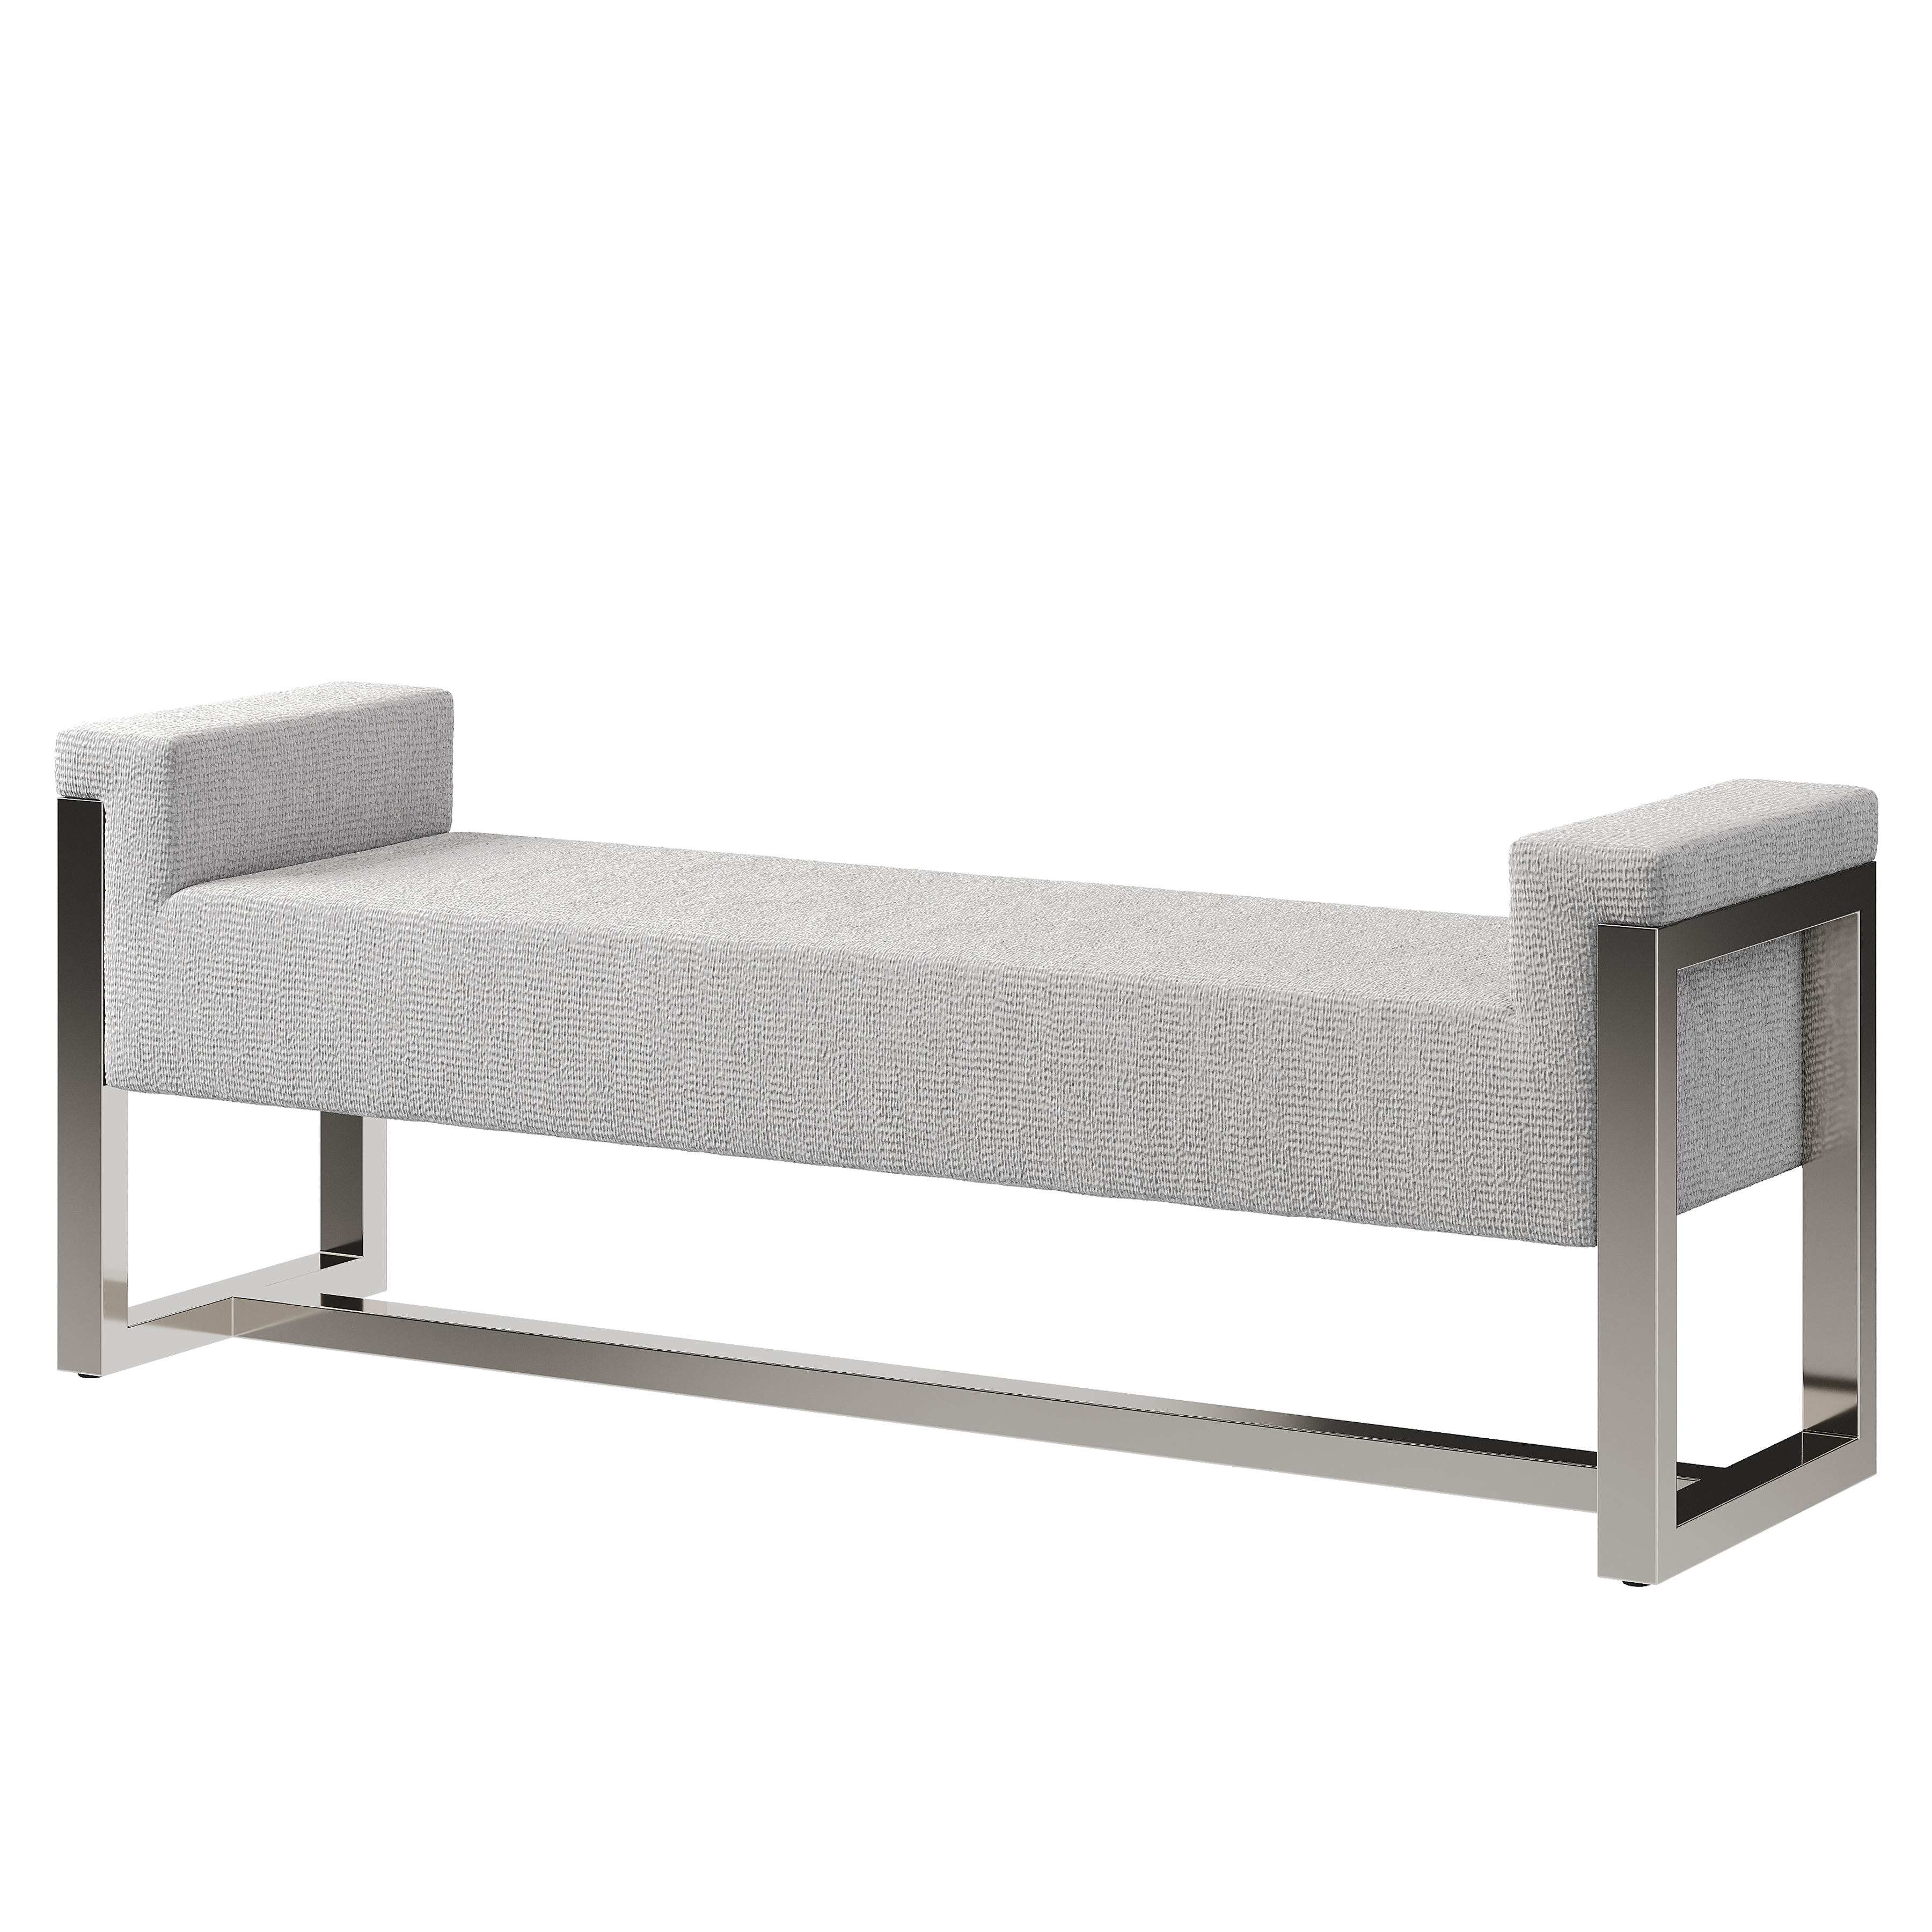 a white bench with metal legs